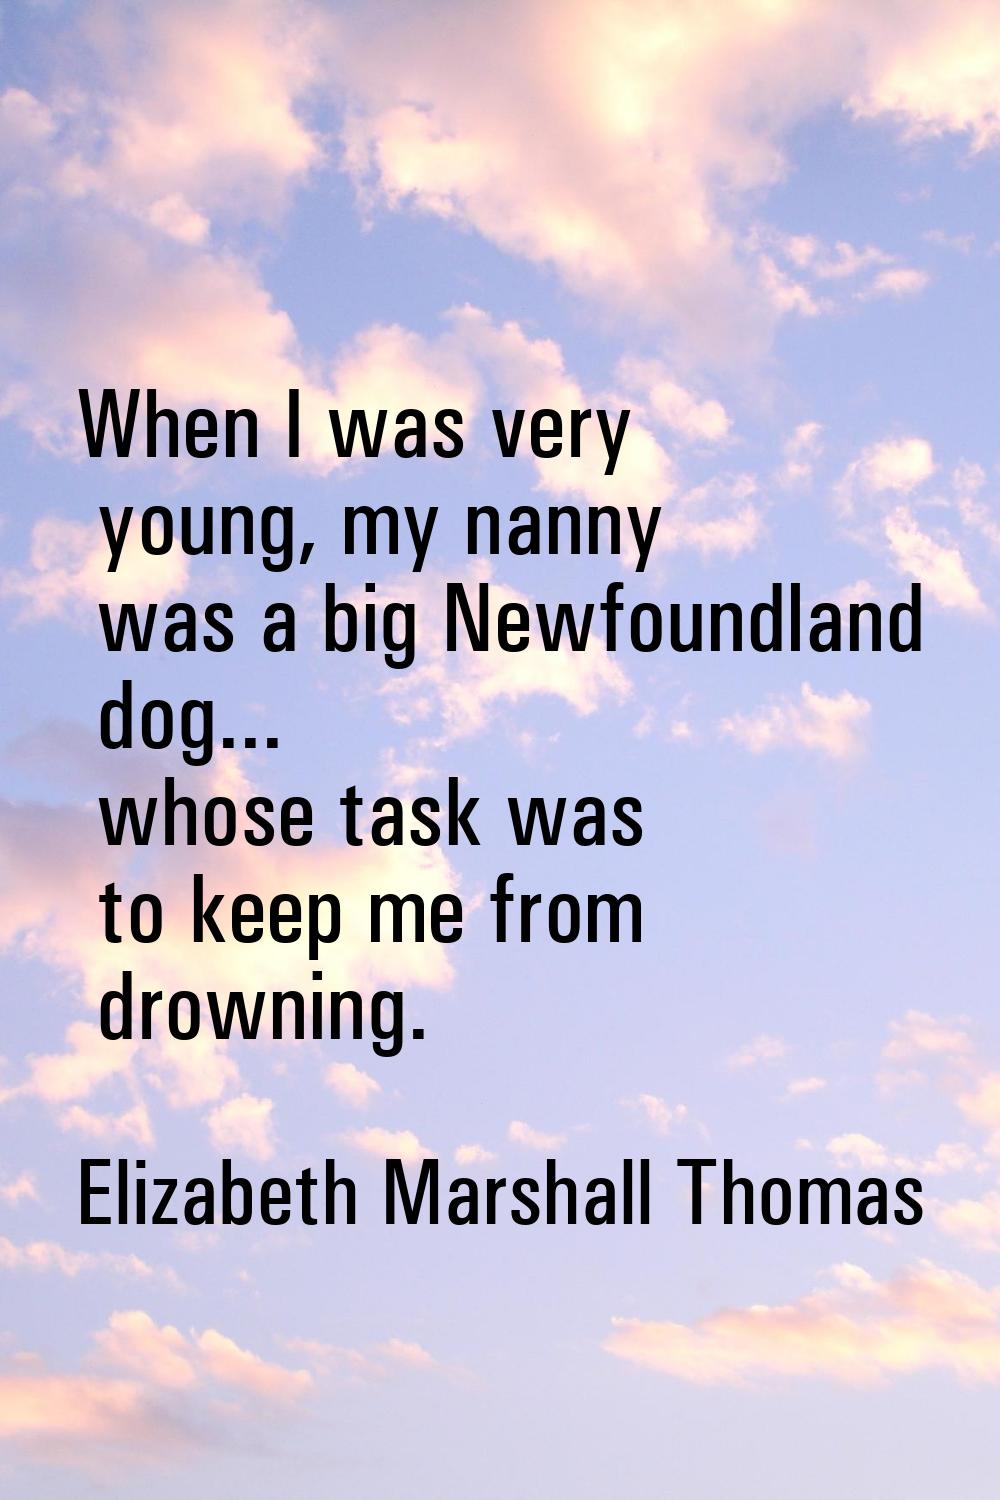 When I was very young, my nanny was a big Newfoundland dog... whose task was to keep me from drowni